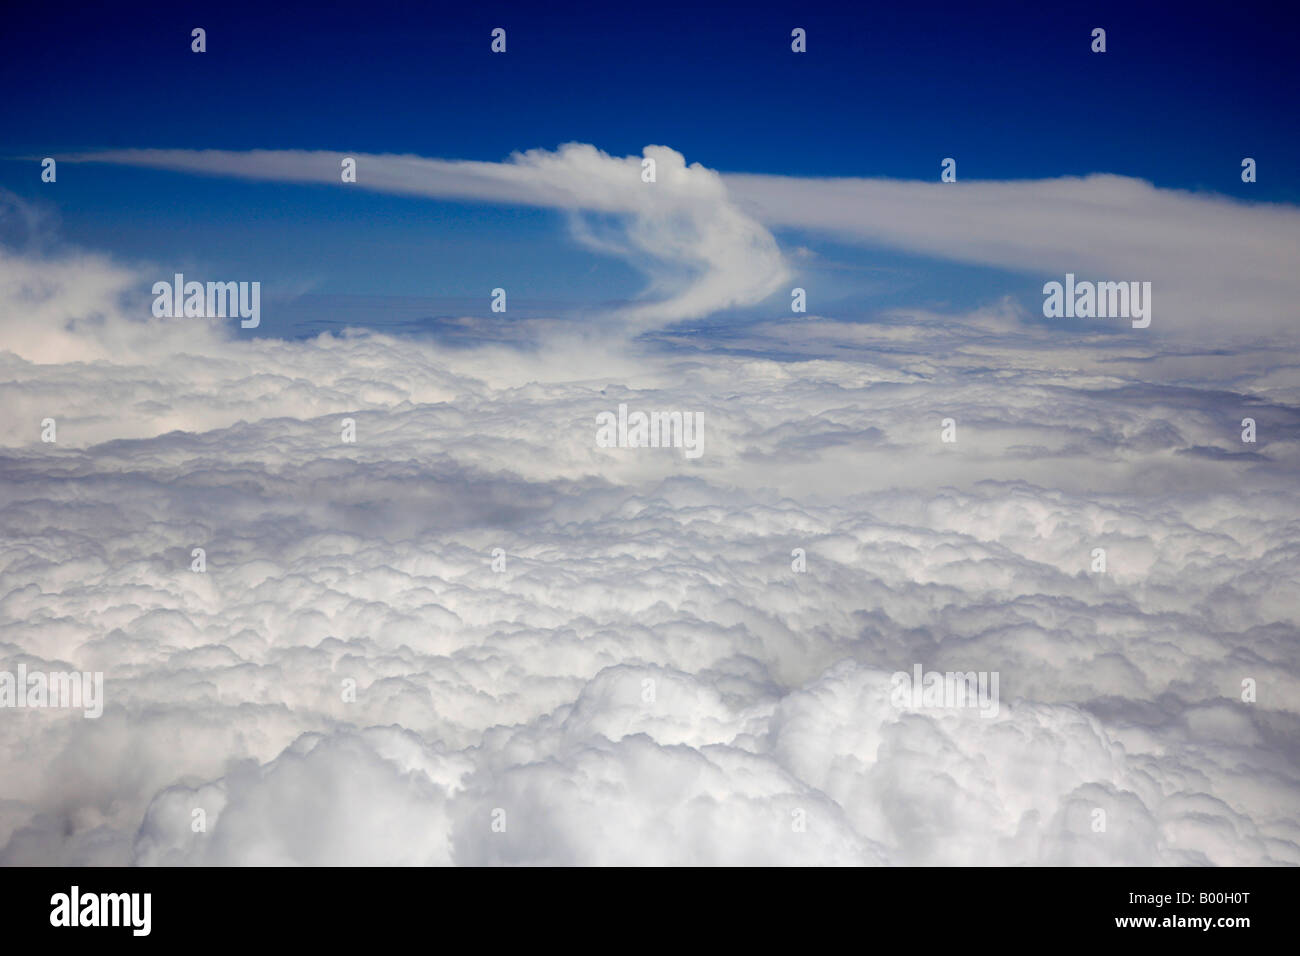 Nimbostratus clouds seen from an aeroplane in a deep blue polarised sky Stock Photo